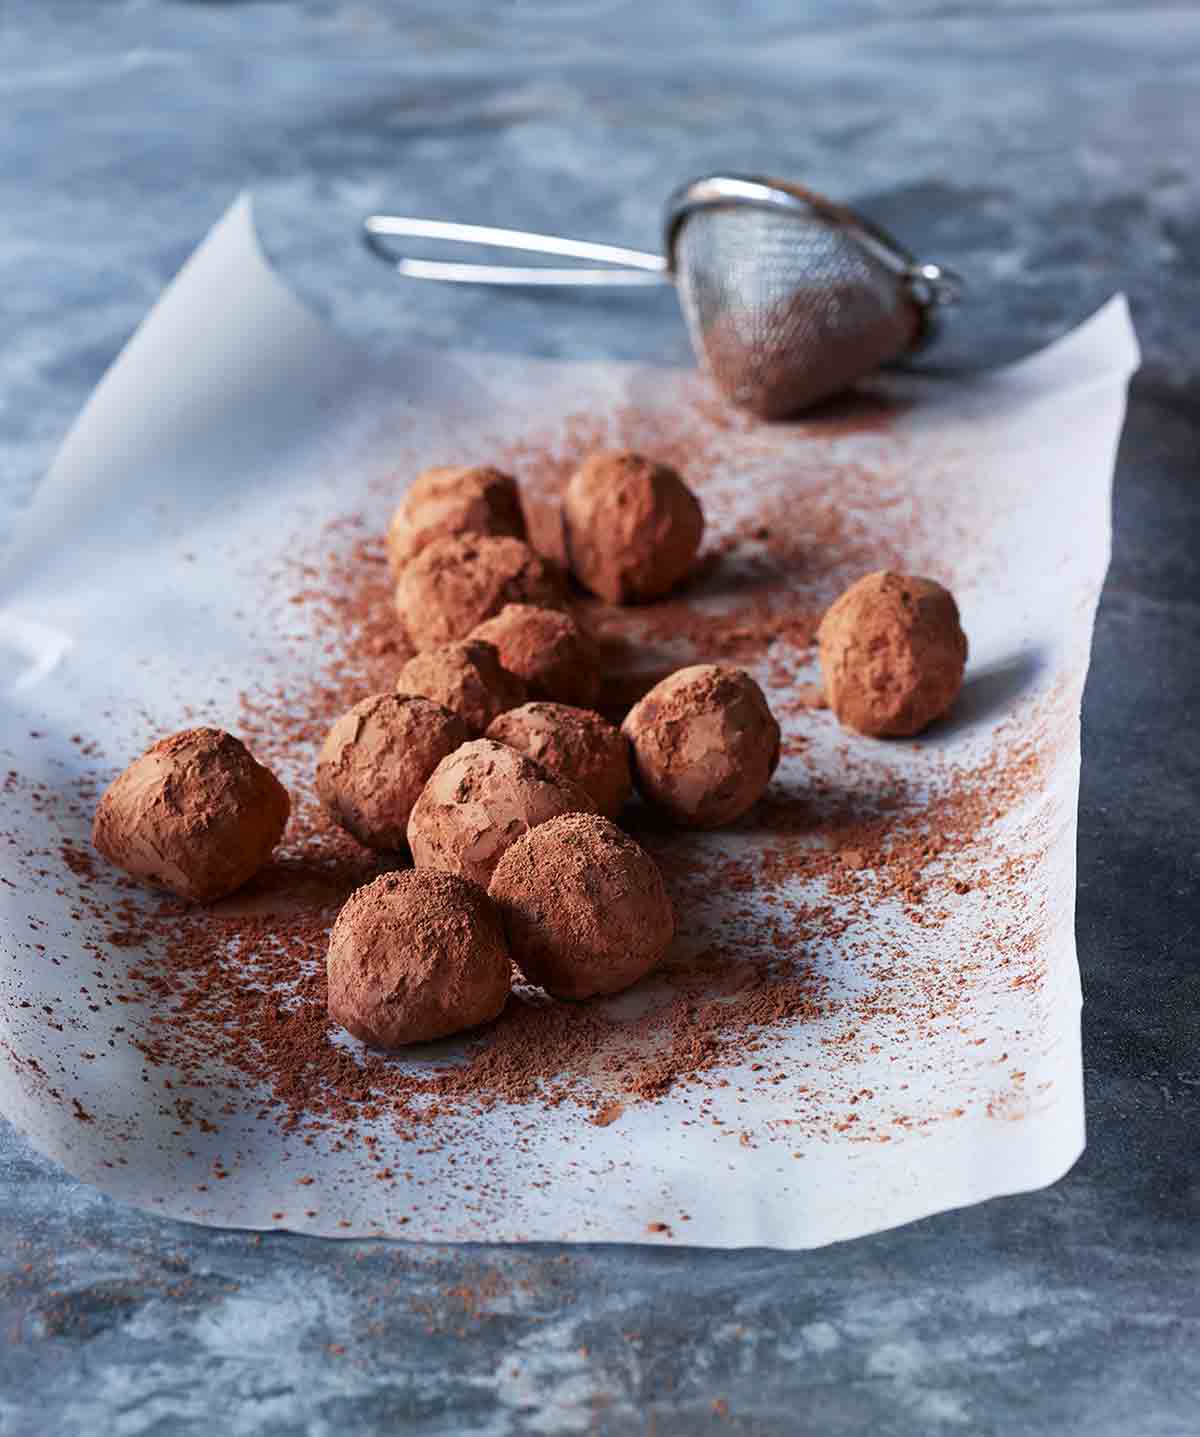 Several chocolate truffles on a sheet of parchment paper with a small mesh strainer nearby.